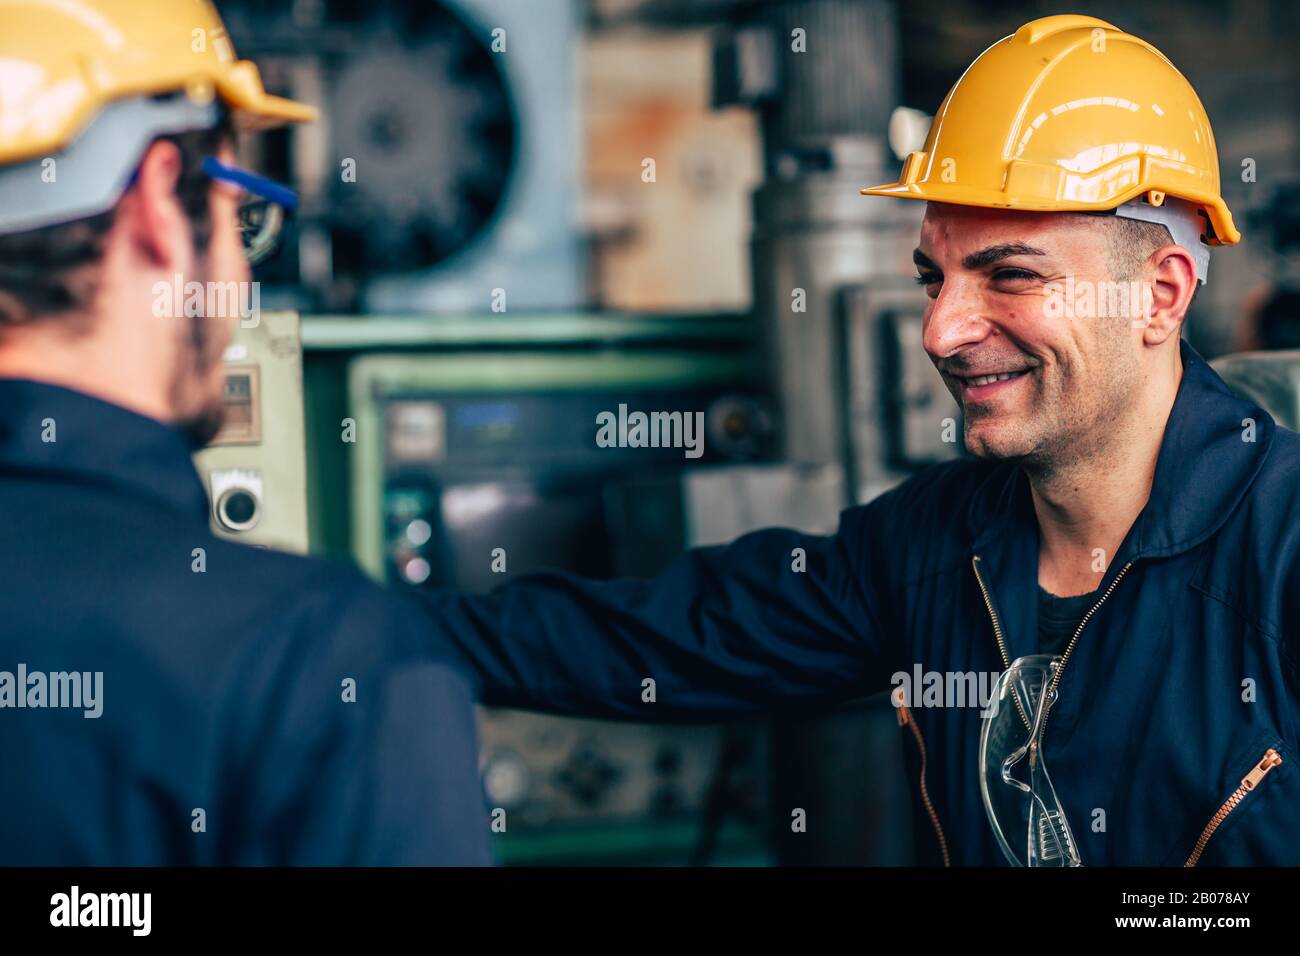 happy worker, smiling industrial technician engineer enjoy working together with coworker. Stock Photo